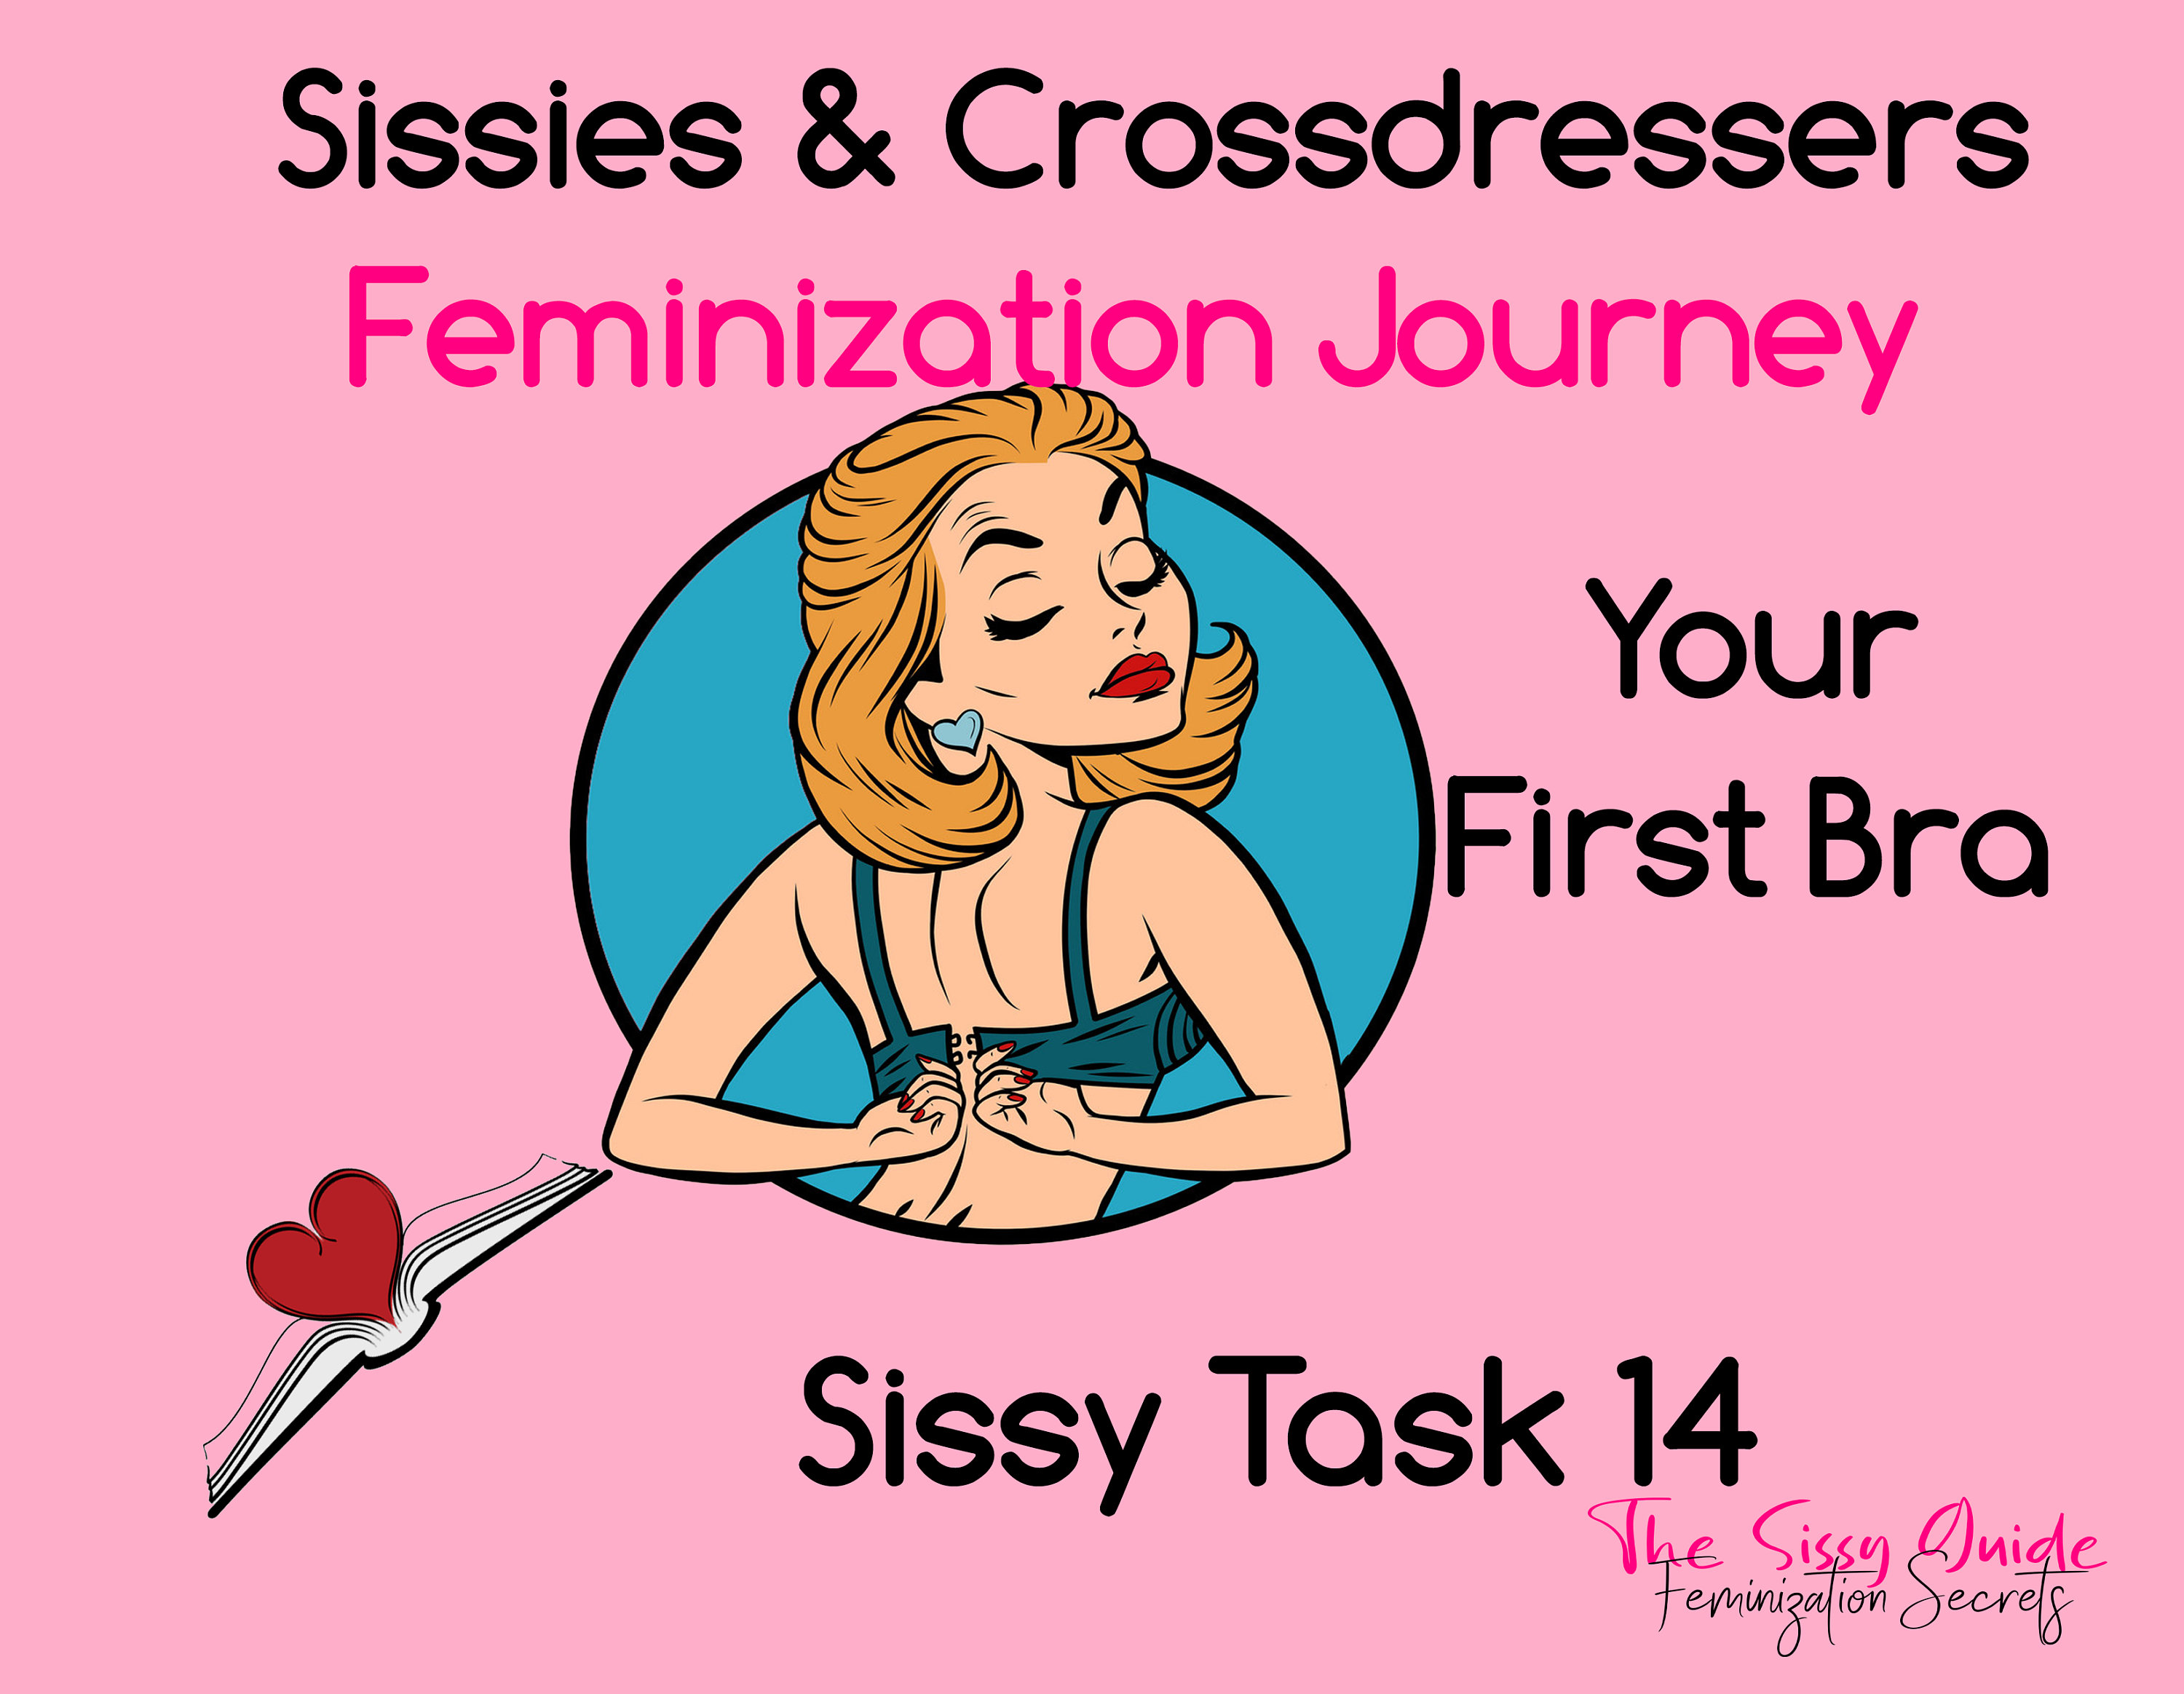 Sissy Task 14 - Your First Bra + The Bra Guide 25 Pages | Sissy Assignments  | Feminization Training and Taks for Crossdressers and Sissies